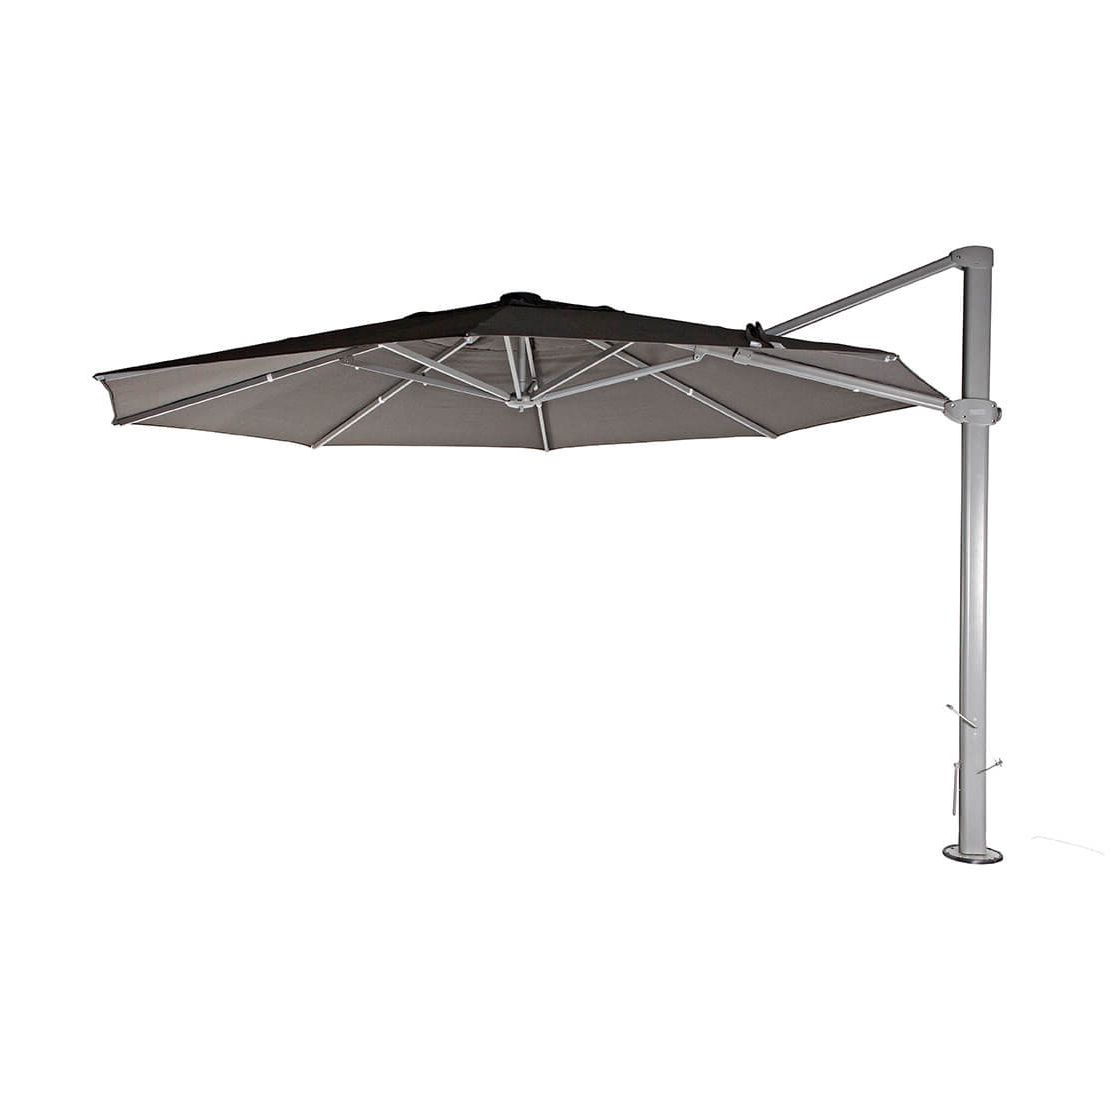 Maidste Square Cantilever Umbrellas Throughout Most Current Shelta Asta 4mx3m Rectangle Cantilever Umbrella (View 15 of 20)